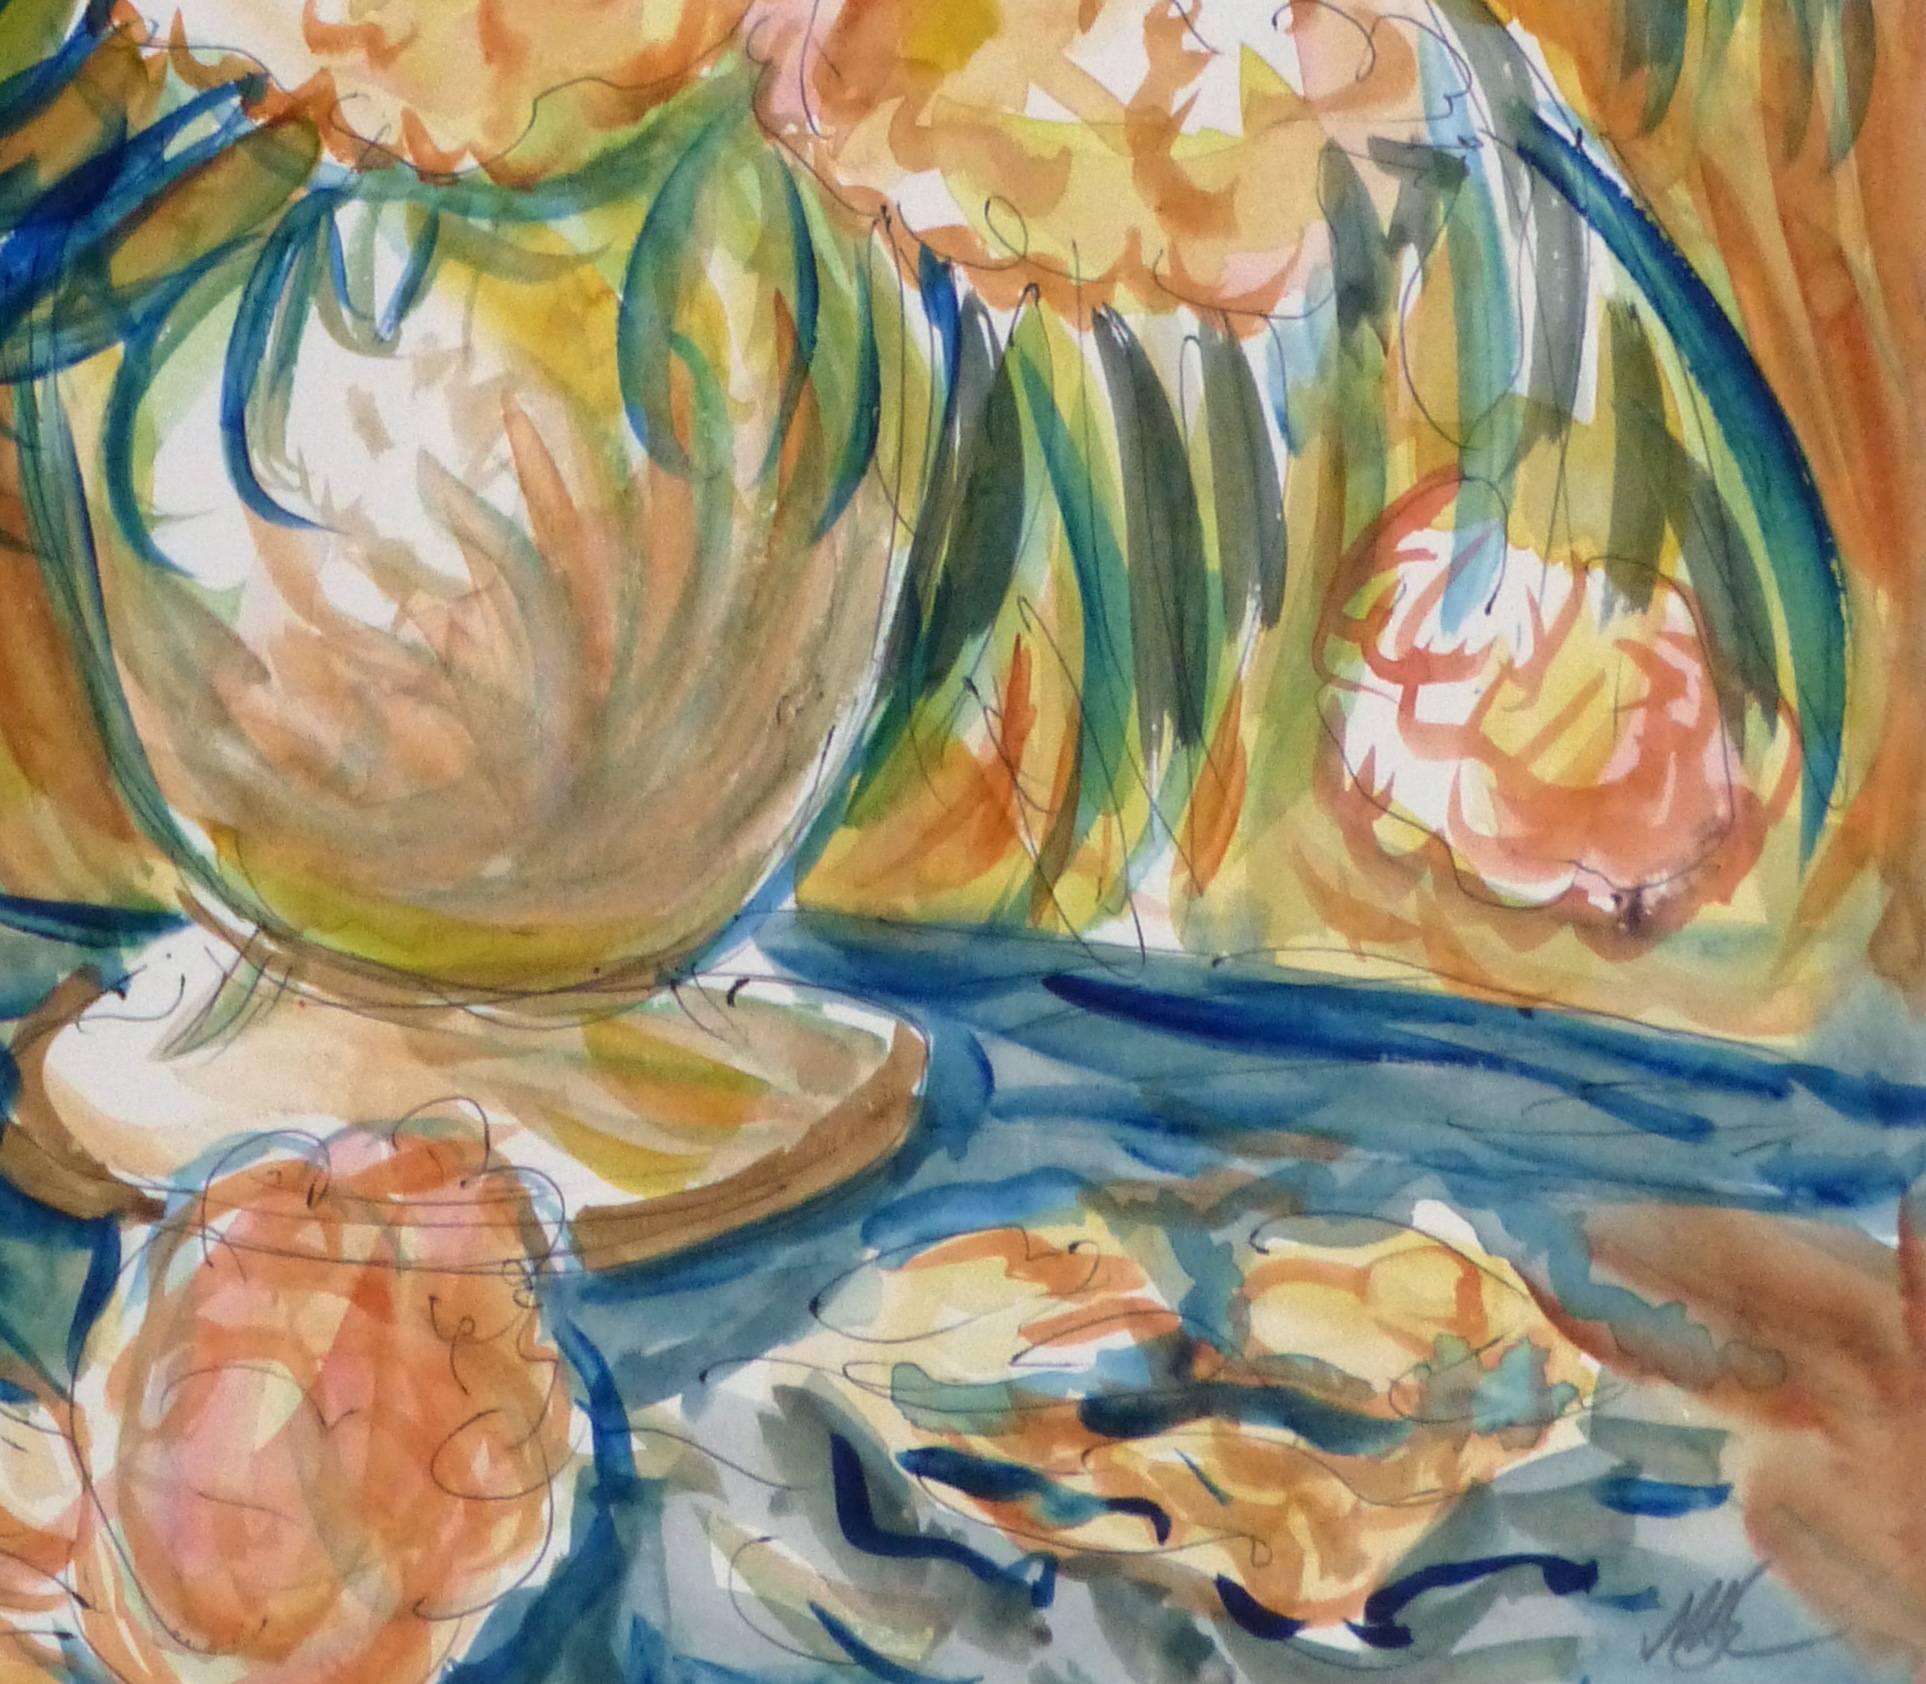 This striking still life painting depicts a vase of flowers bursting with color -  vivid hues of orange, green, and blue intermingling - and a peeled tangerine in the foreground. From the 1990s. Signed lower right. 

Original artwork on paper